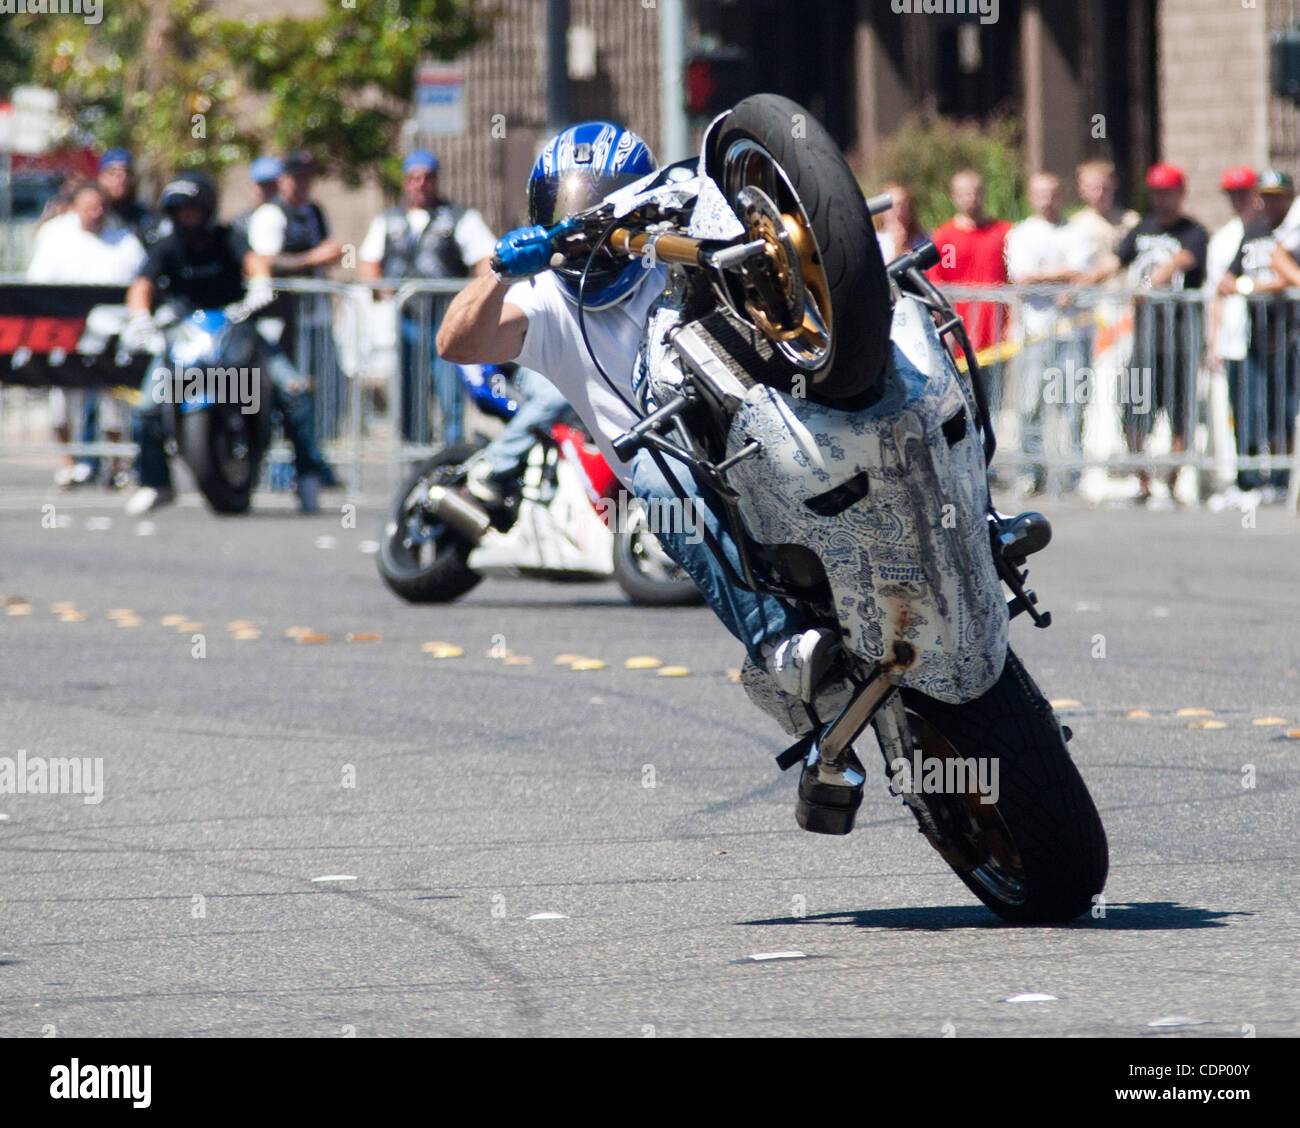 July 9, 2011 - Modesto, CA, U.S - Hooligans Motorcycle Club heald the 7th annual Street Bike Festival Saturday July 10th, 2011(20110710) in Modesto CA. featuring one of the largest free street bike stunt exhibitions in the United States. Street bike athletes from all over Northern and Southern Calif Stock Photo